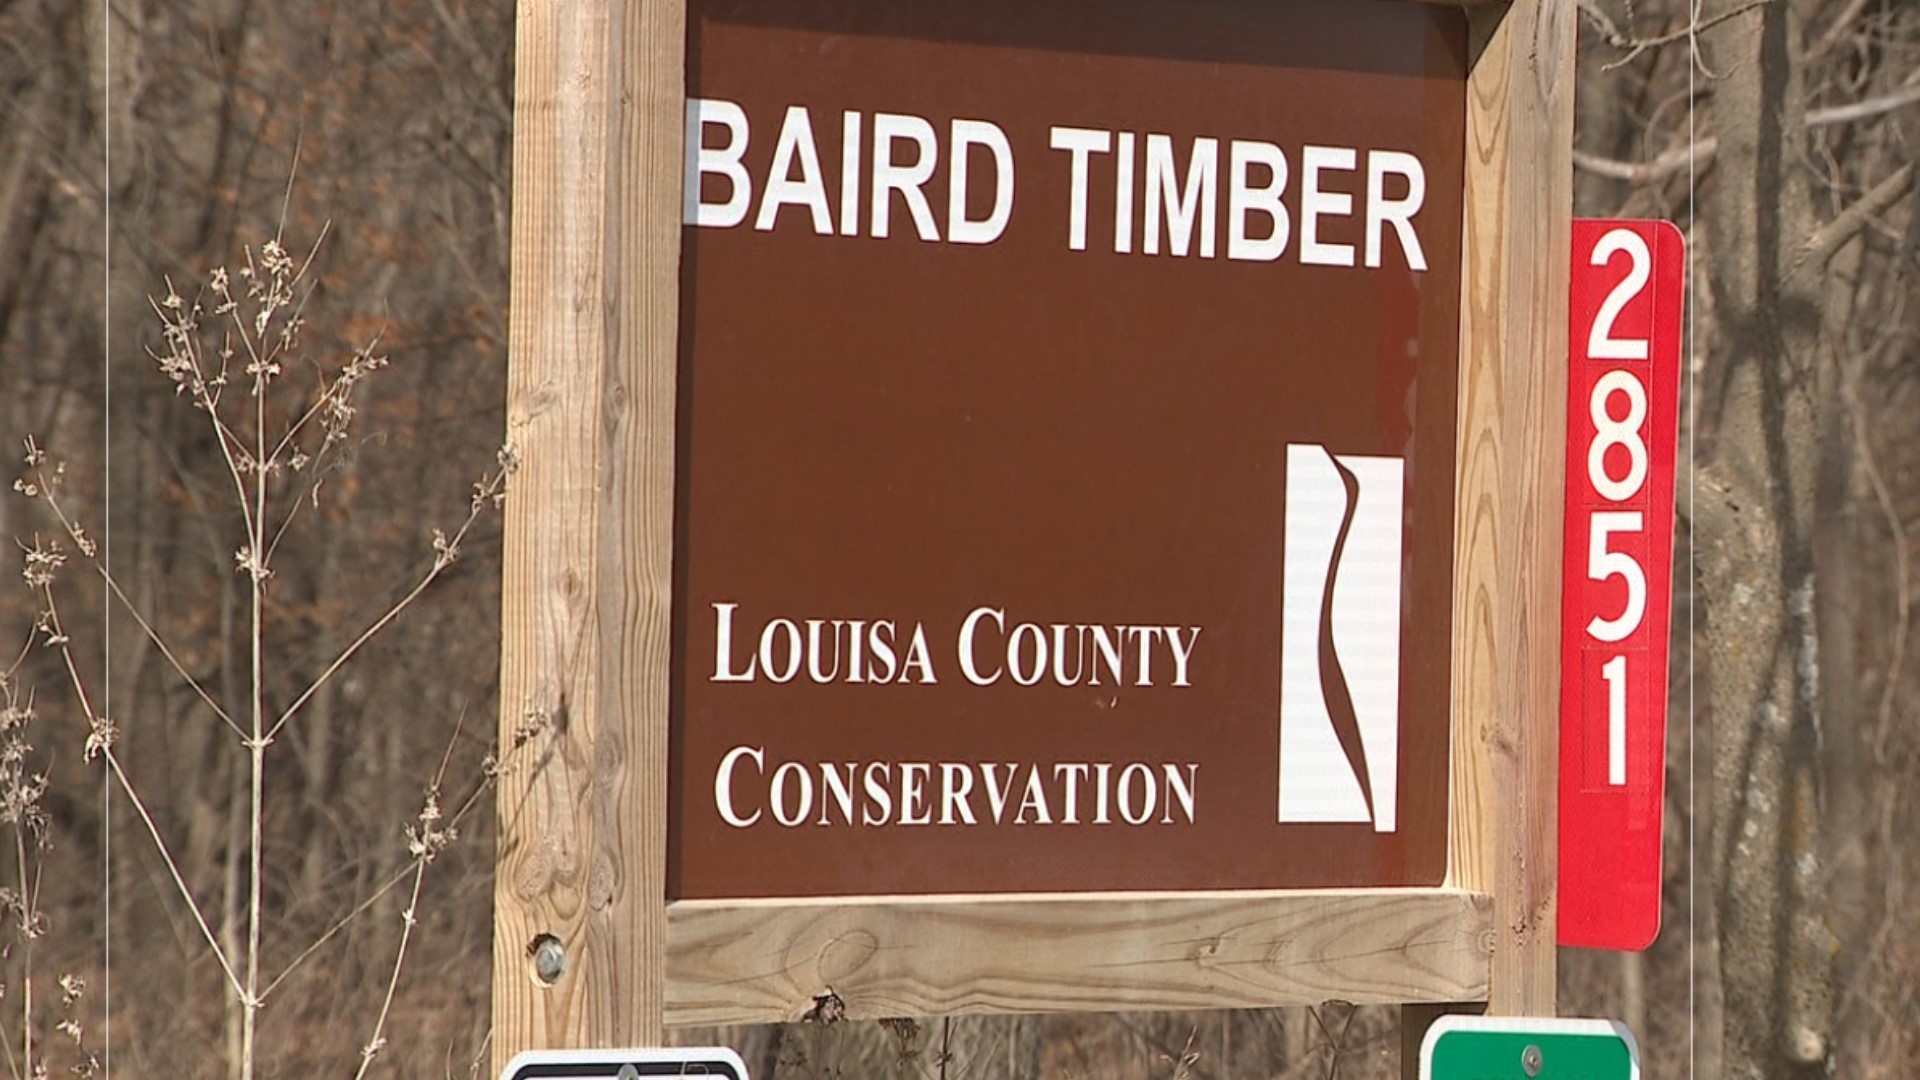 For months, the Louisa County Conservation Board has debated selling the 18-acres. At the May 3 board meeting, Baird decedents asked for the land to remain public.